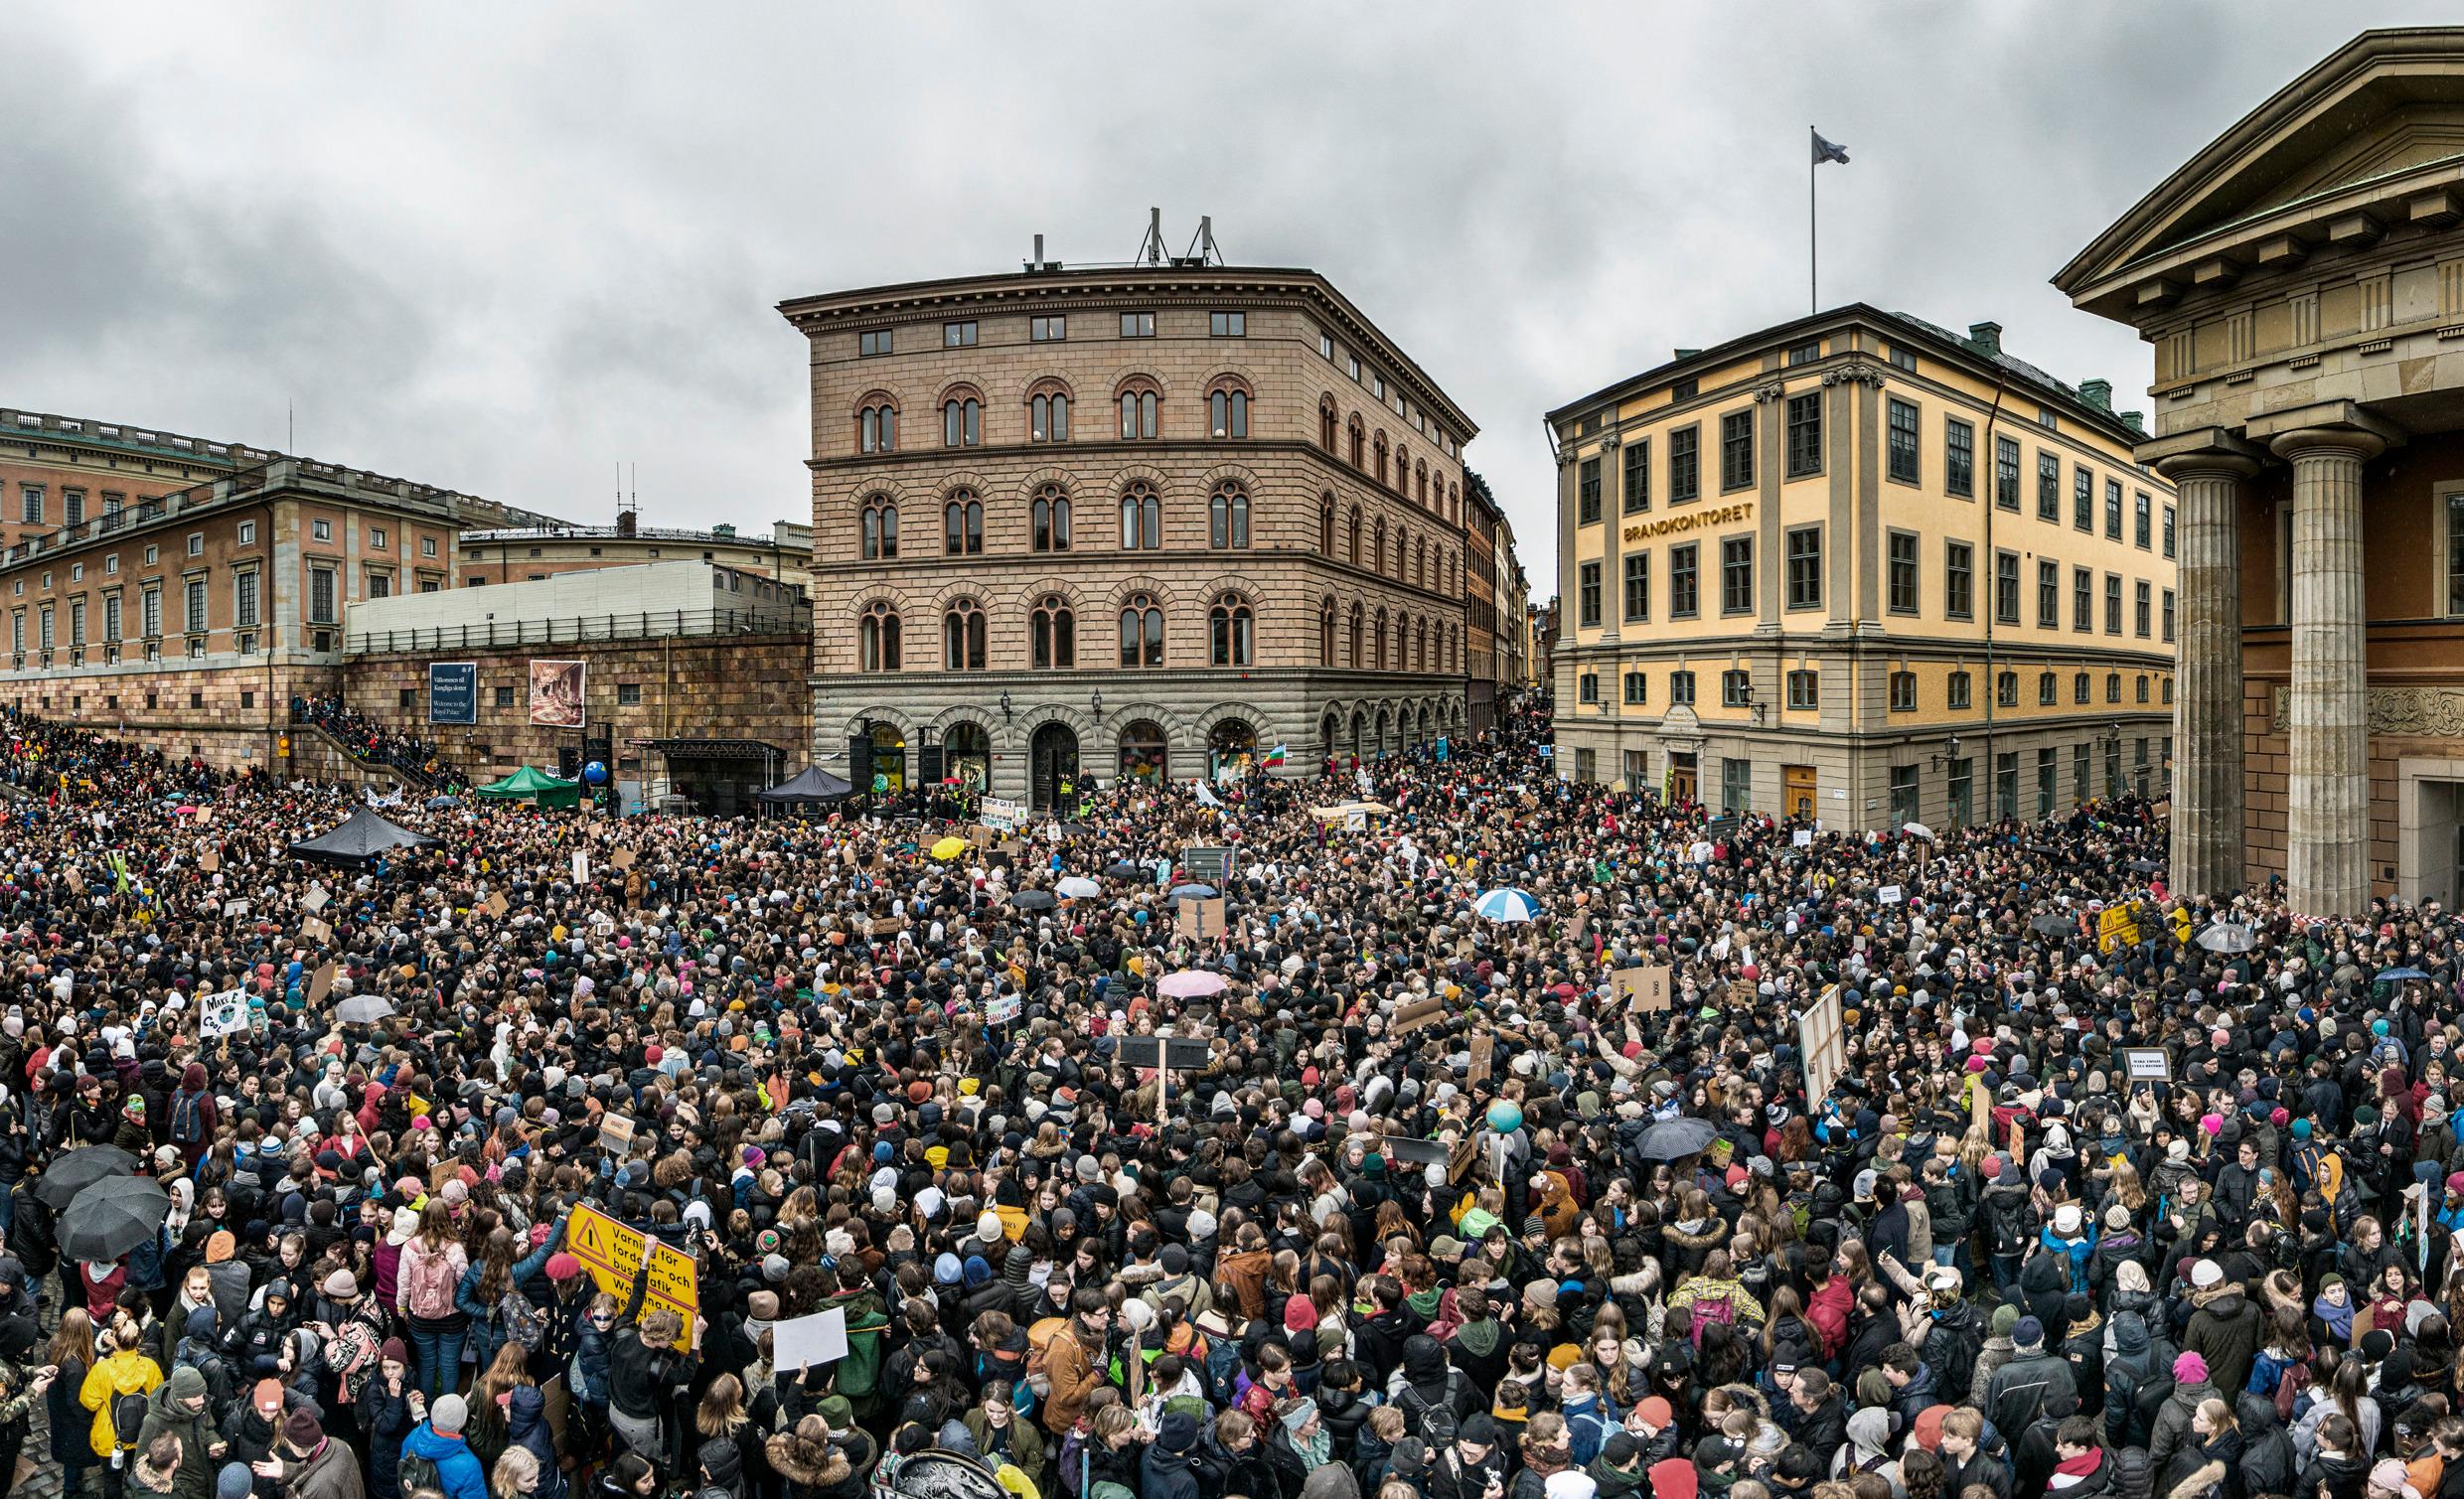 A crowd of people demonstrating in front of majestic-looking buildings. Swedish openness includes the right to demonstrate.